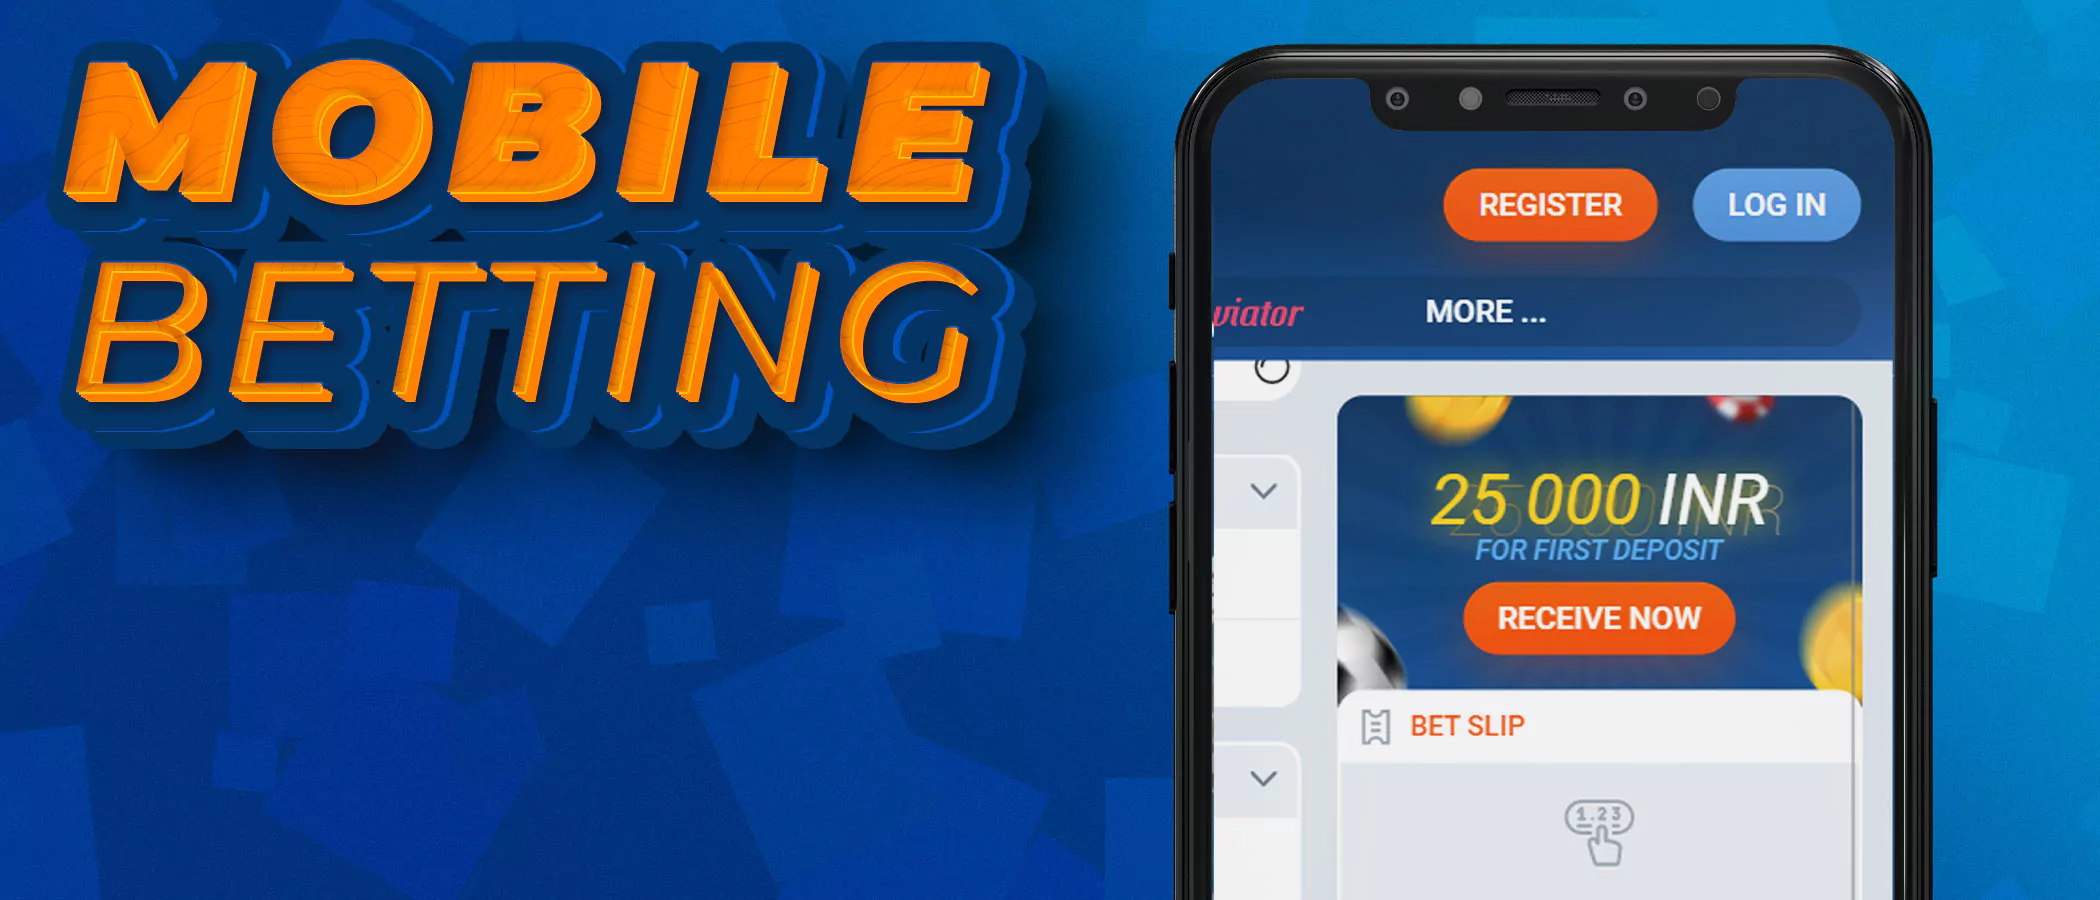 Mobile betting on the Mostbet company.